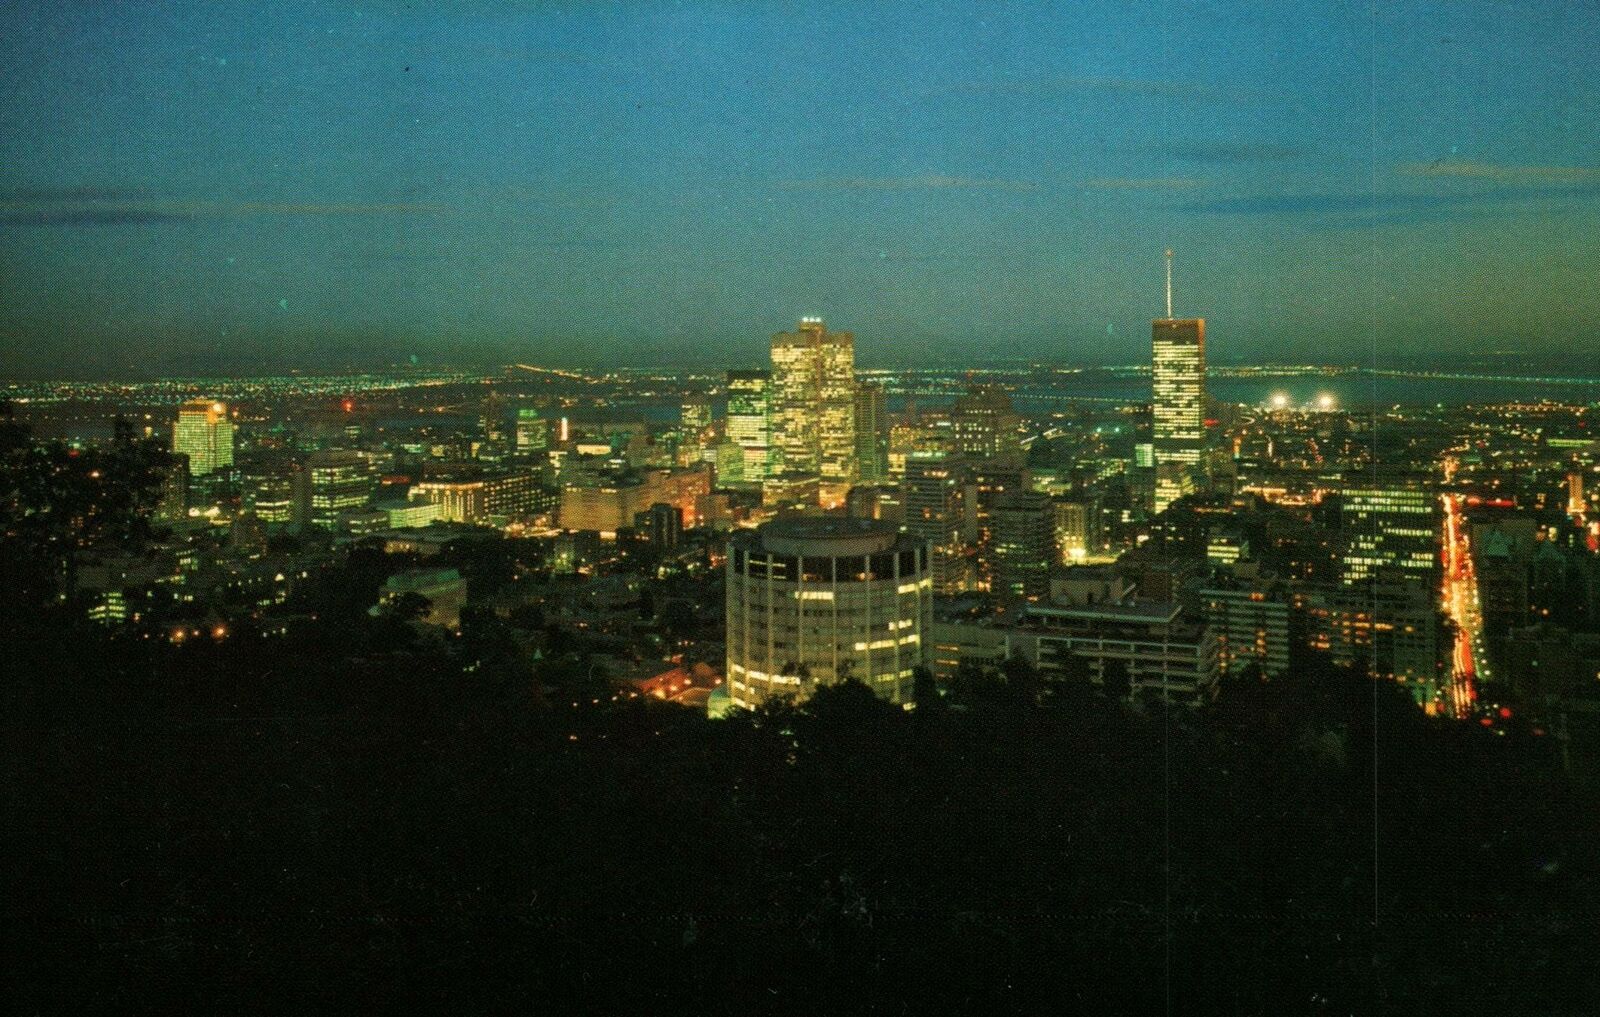 VINTAGE POSTCARD NIGHT VIEW OF MONTREAL 2nd LARGEST FRENCH-SPEAKING CITY WORLD